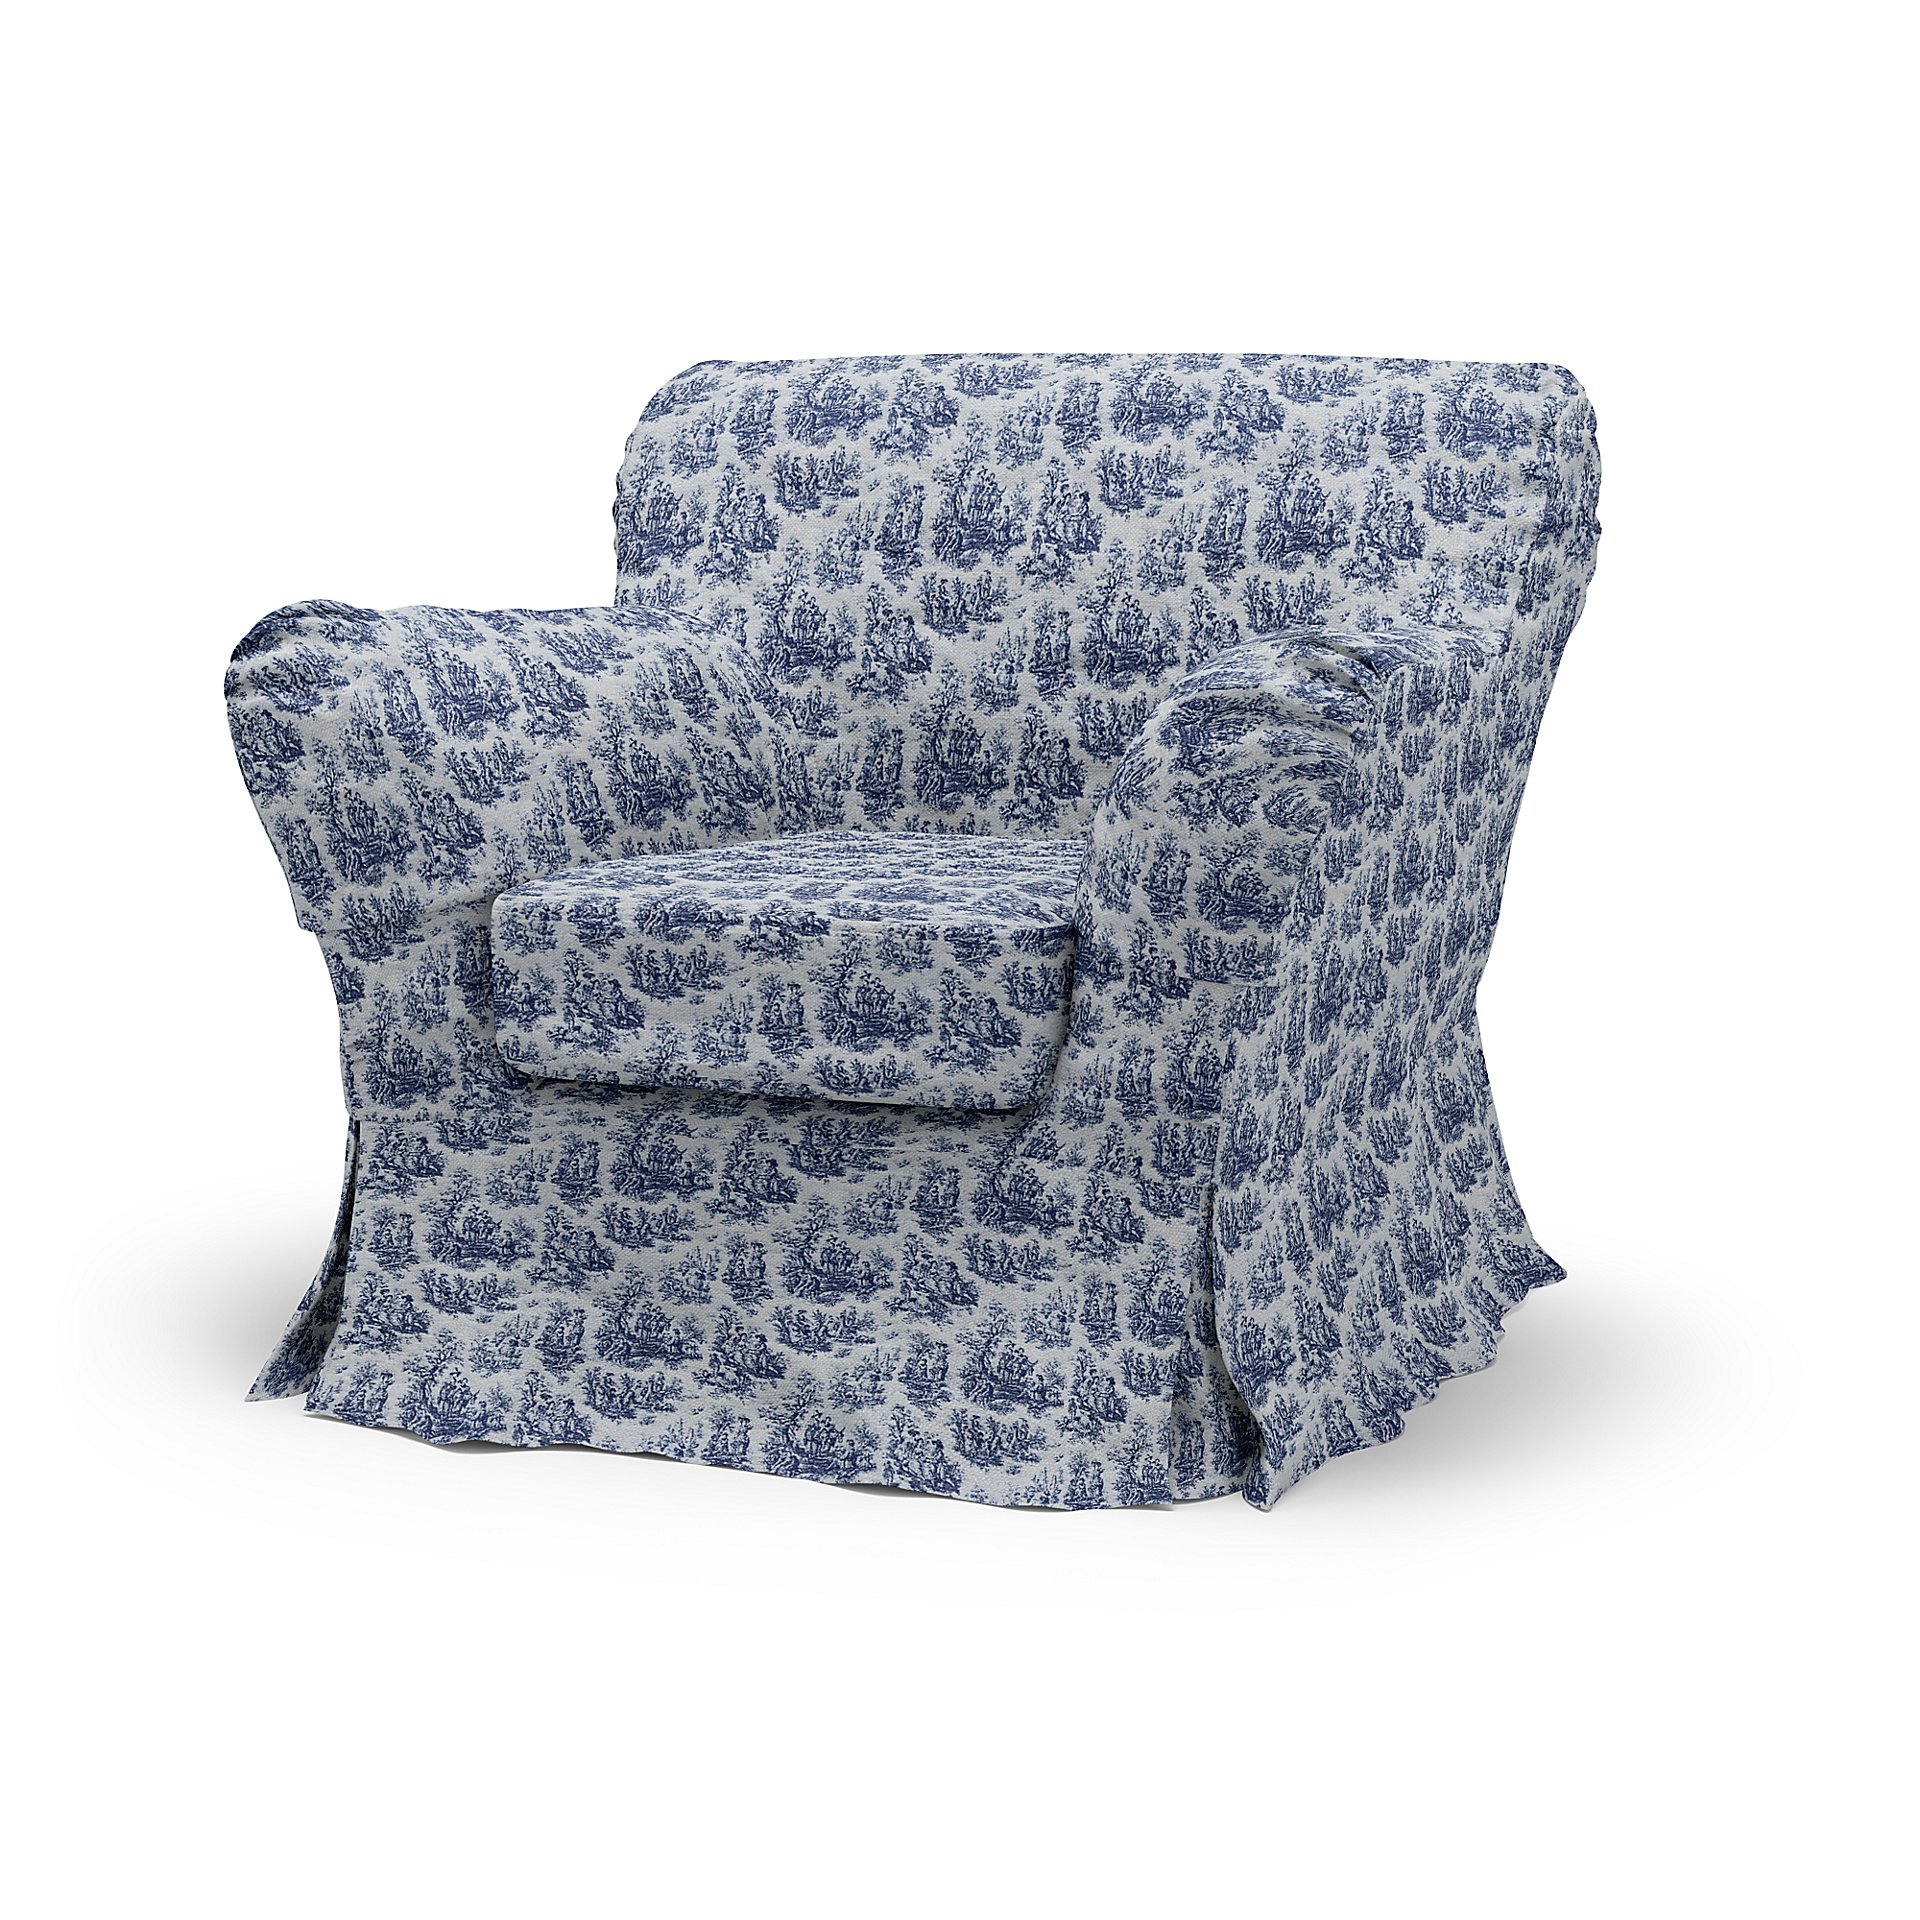 IKEA - Tomelilla Low Back Armchair Cover (Large), Dark Blue, Boucle & Texture - Bemz